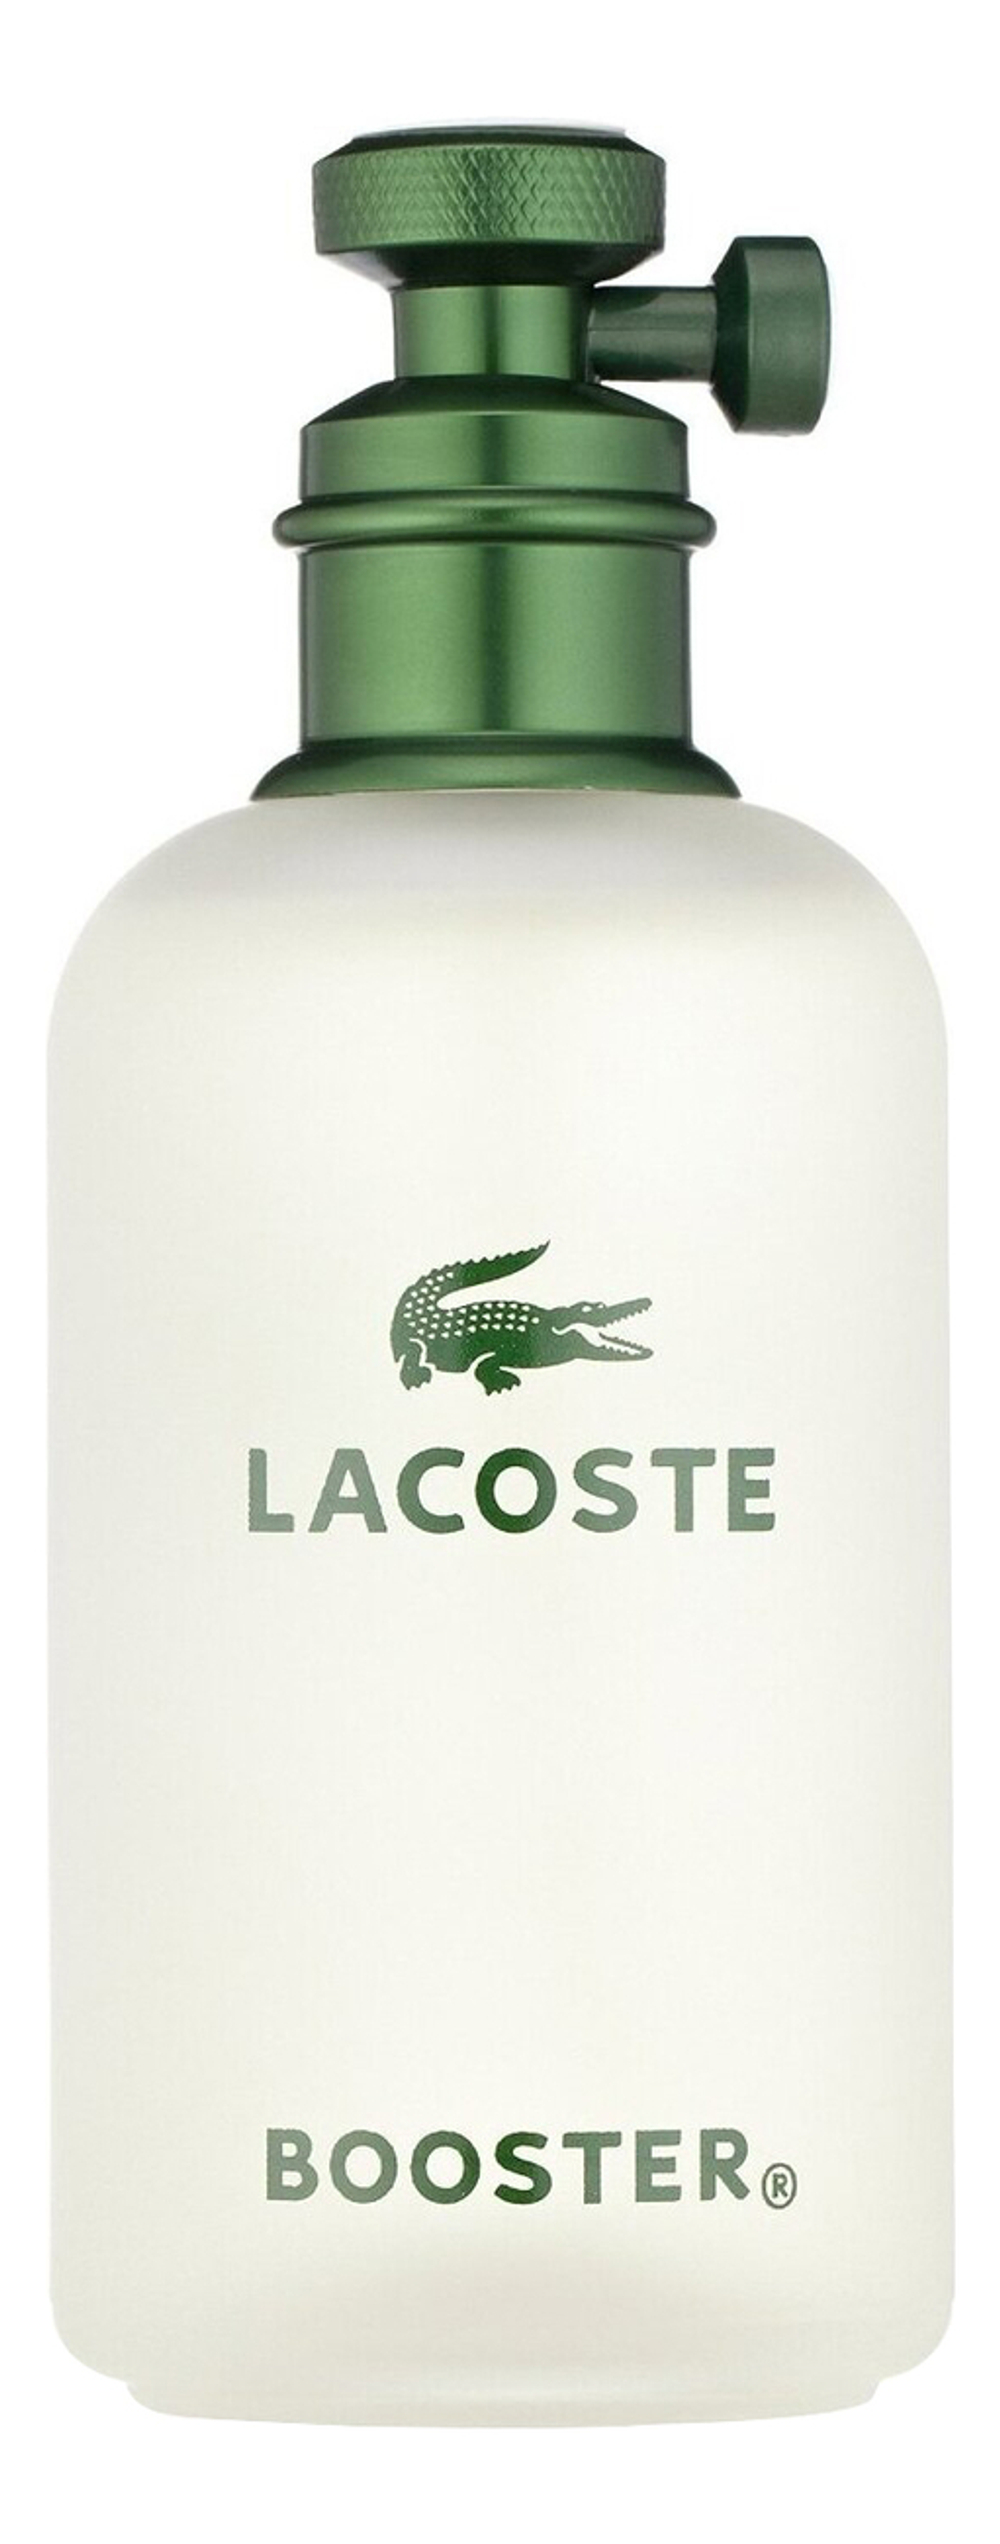 Lacoste Booster Pour Homme